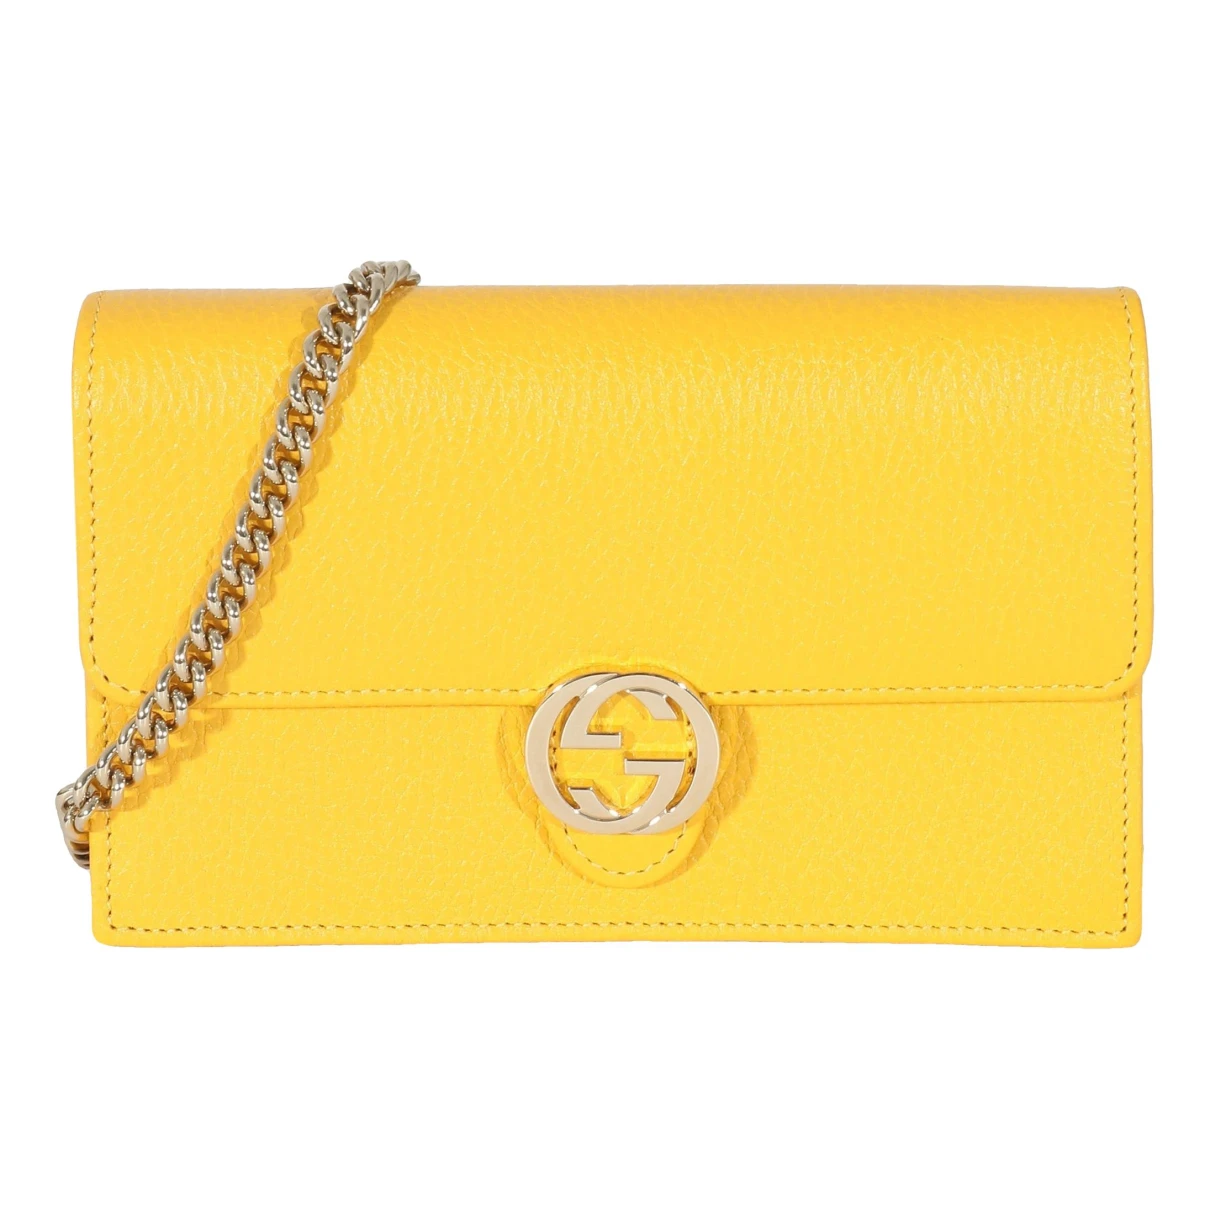 Pre-owned Gucci Gg Marmont Chain Wallet Leather Handbag In Yellow